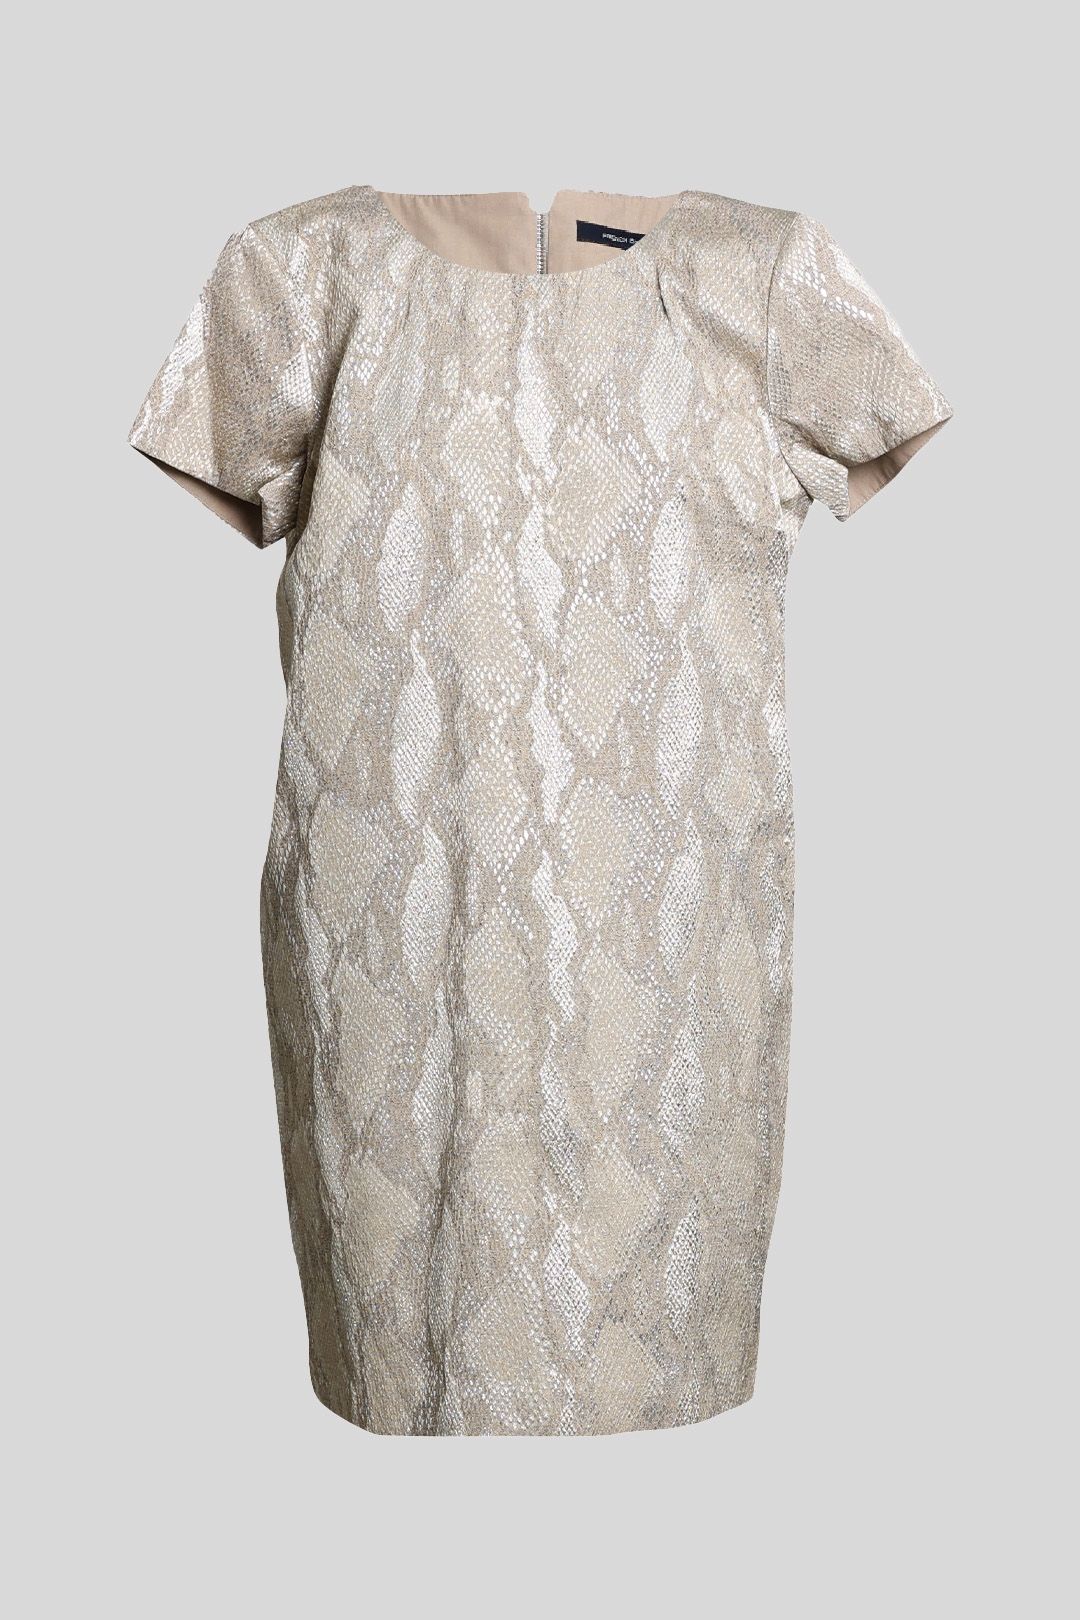 French Connection  Metallic Gold Shift Dress in Snake Print